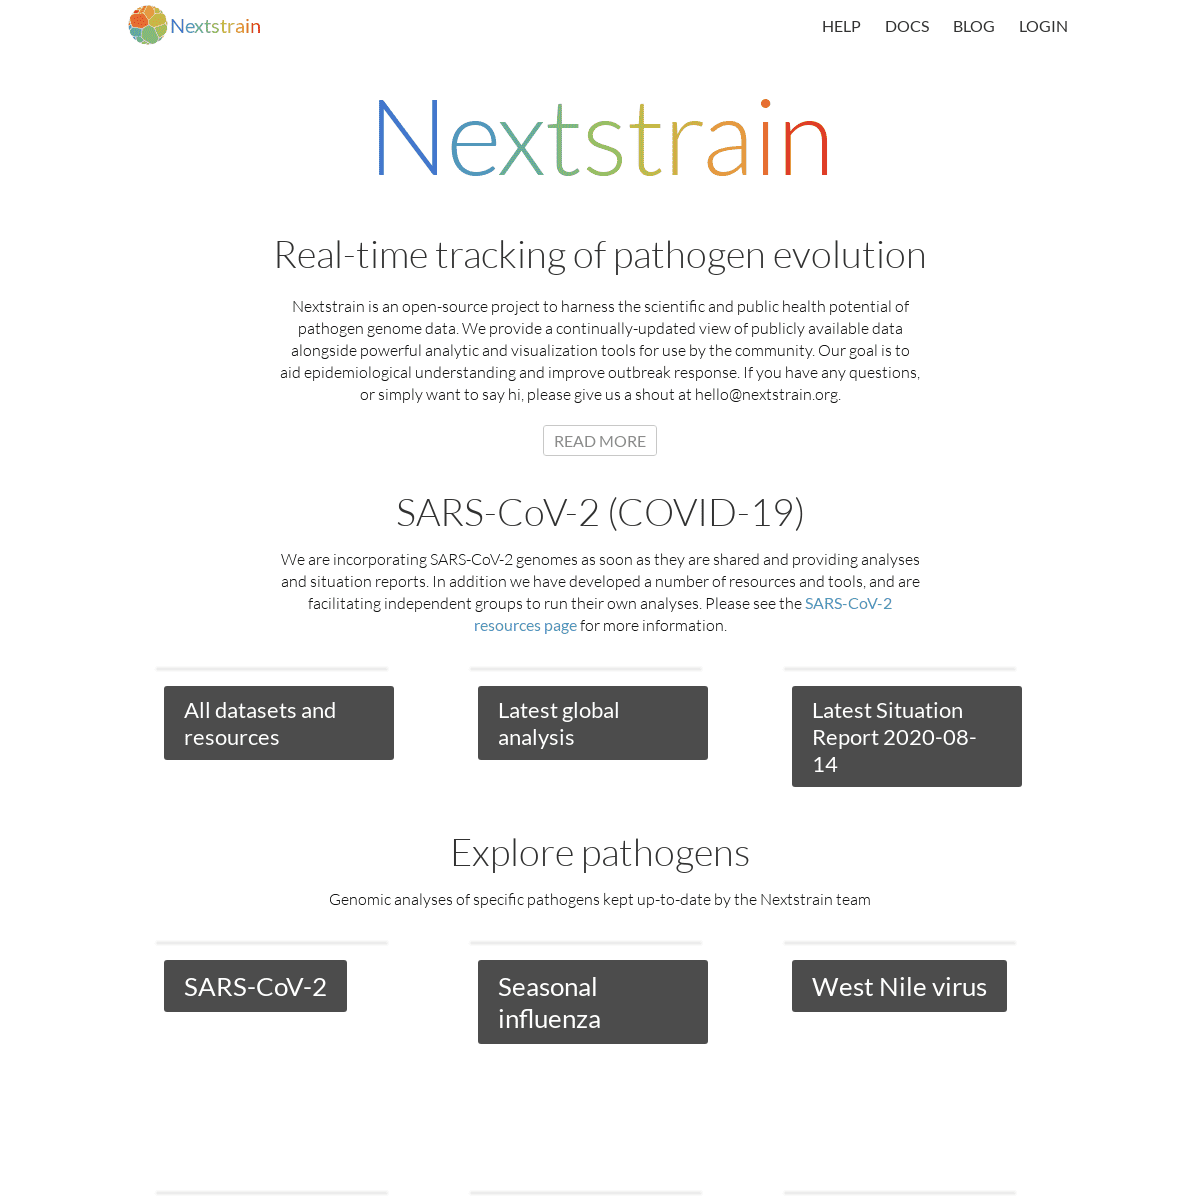 A complete backup of https://nextstrain.org